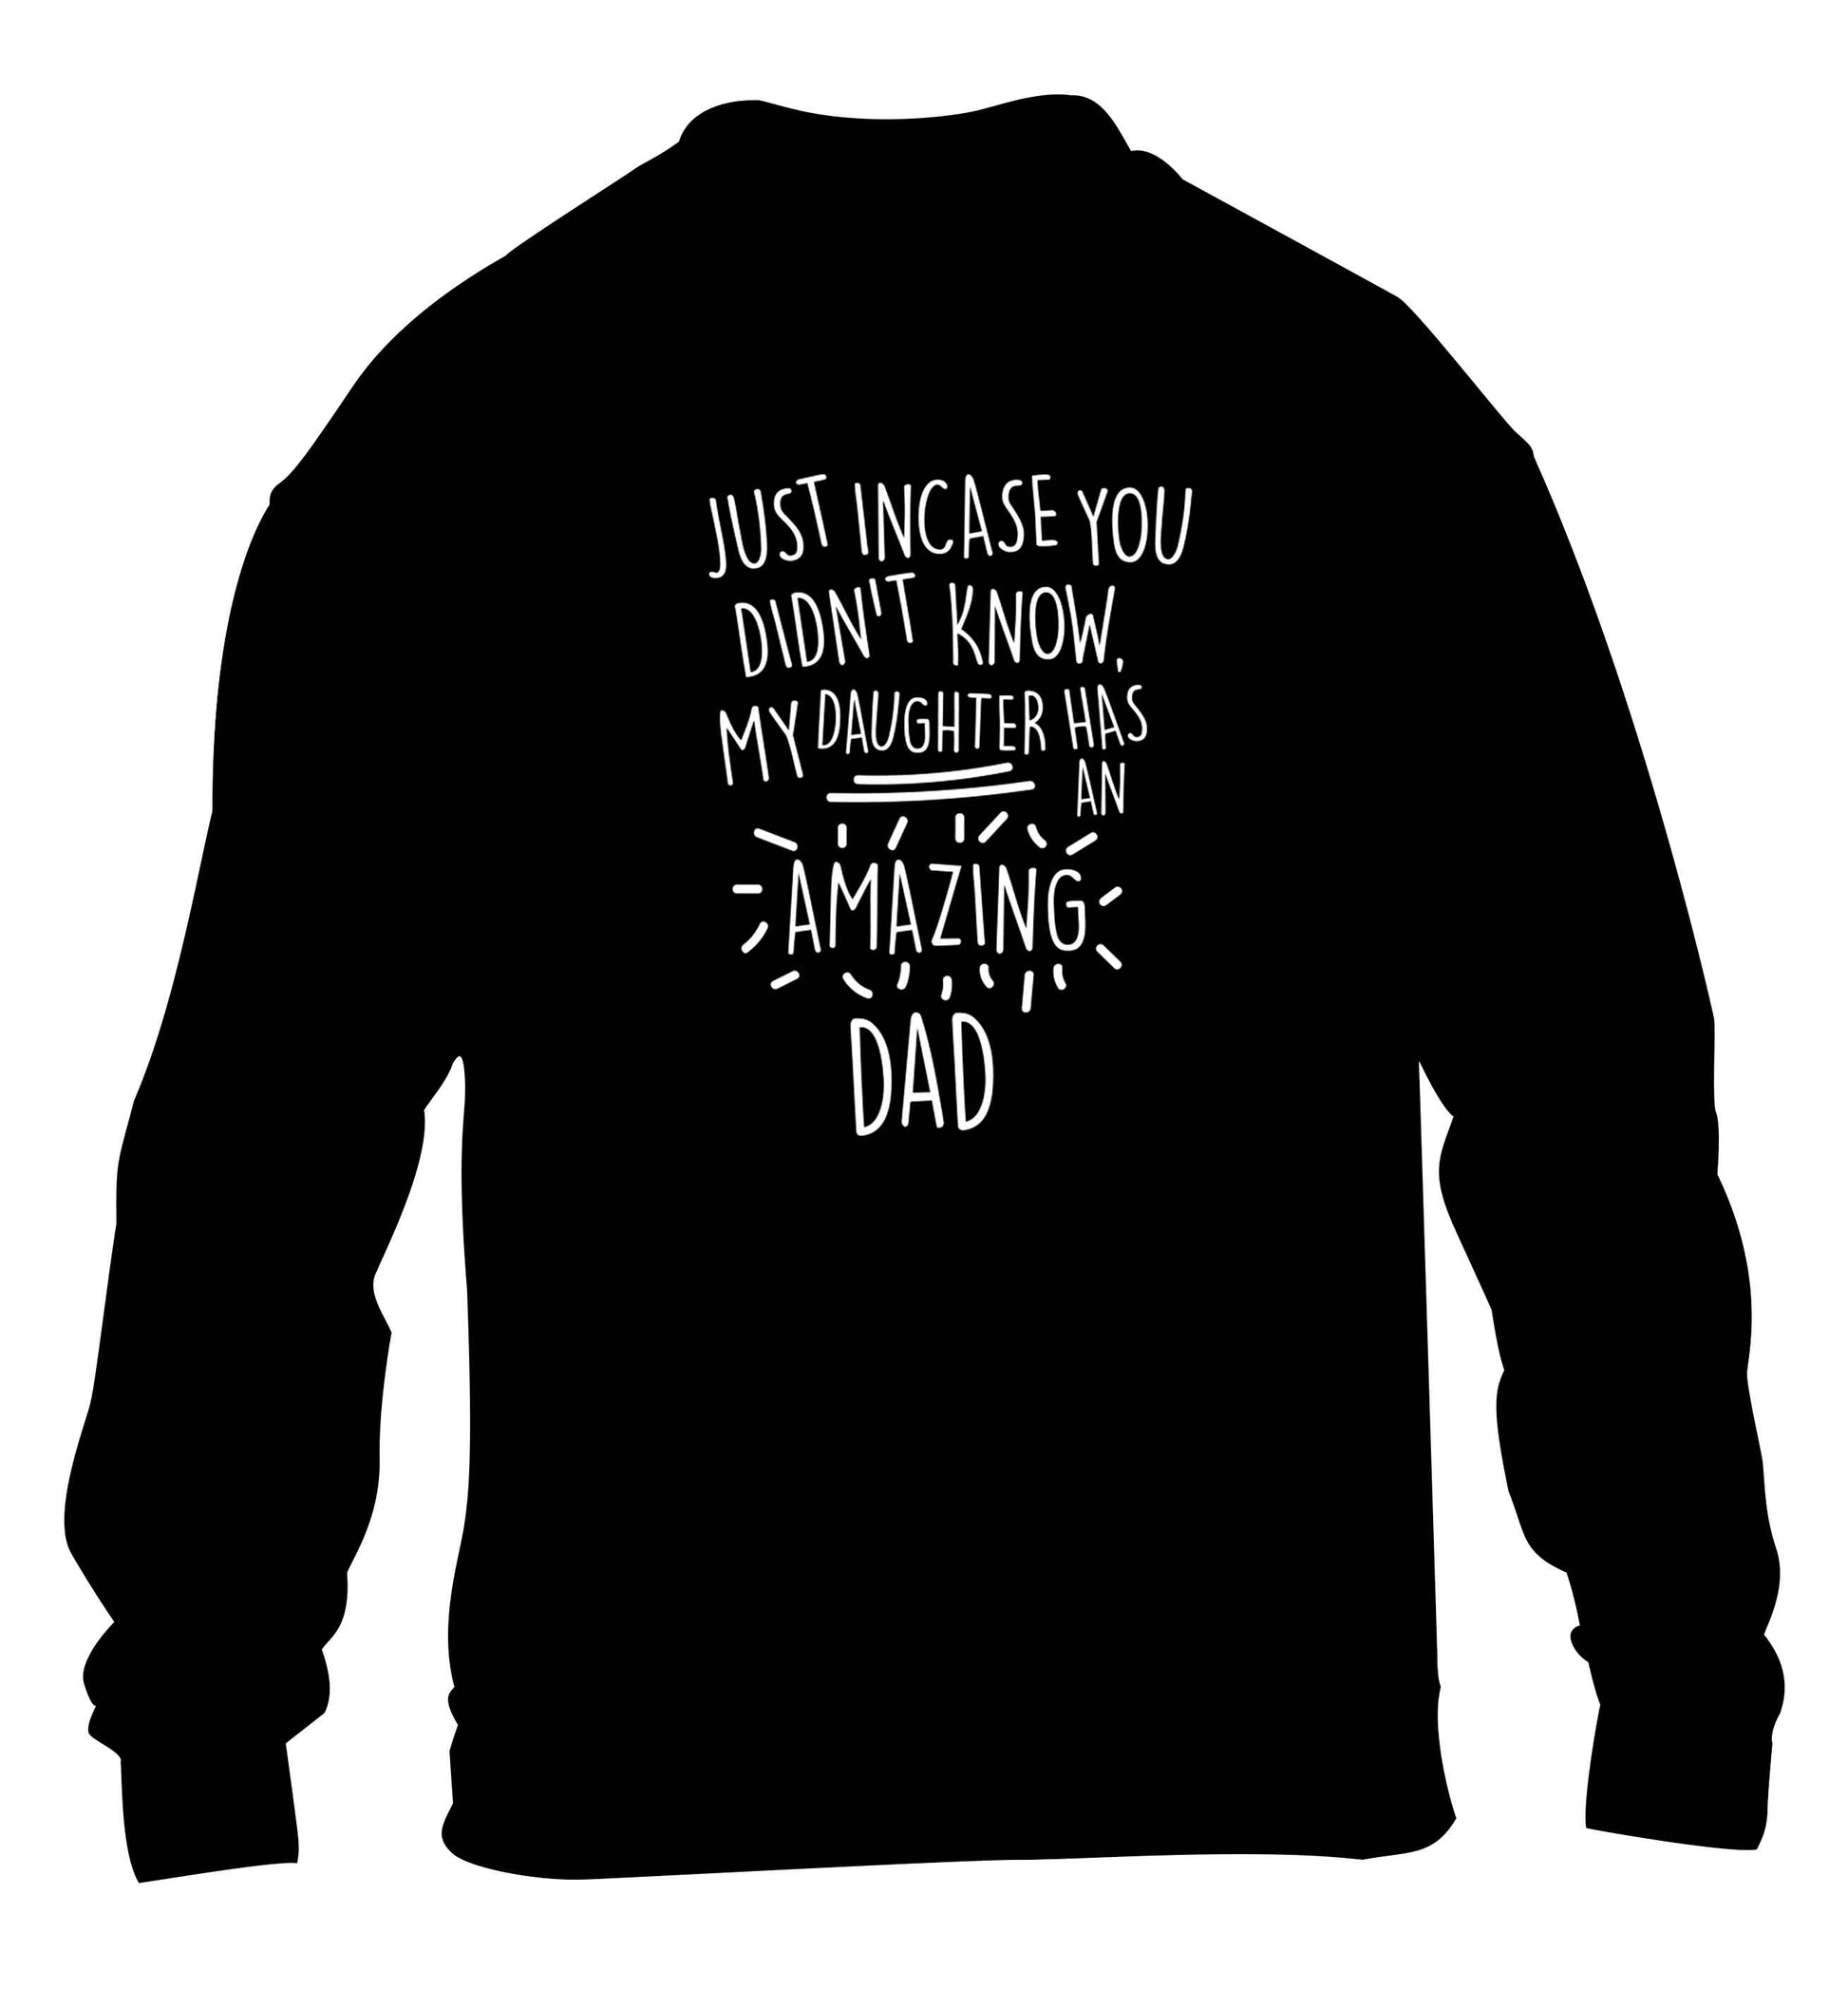 Just incase you didn't know my daughter has an amazing dad children's black sweater 12-13 Years